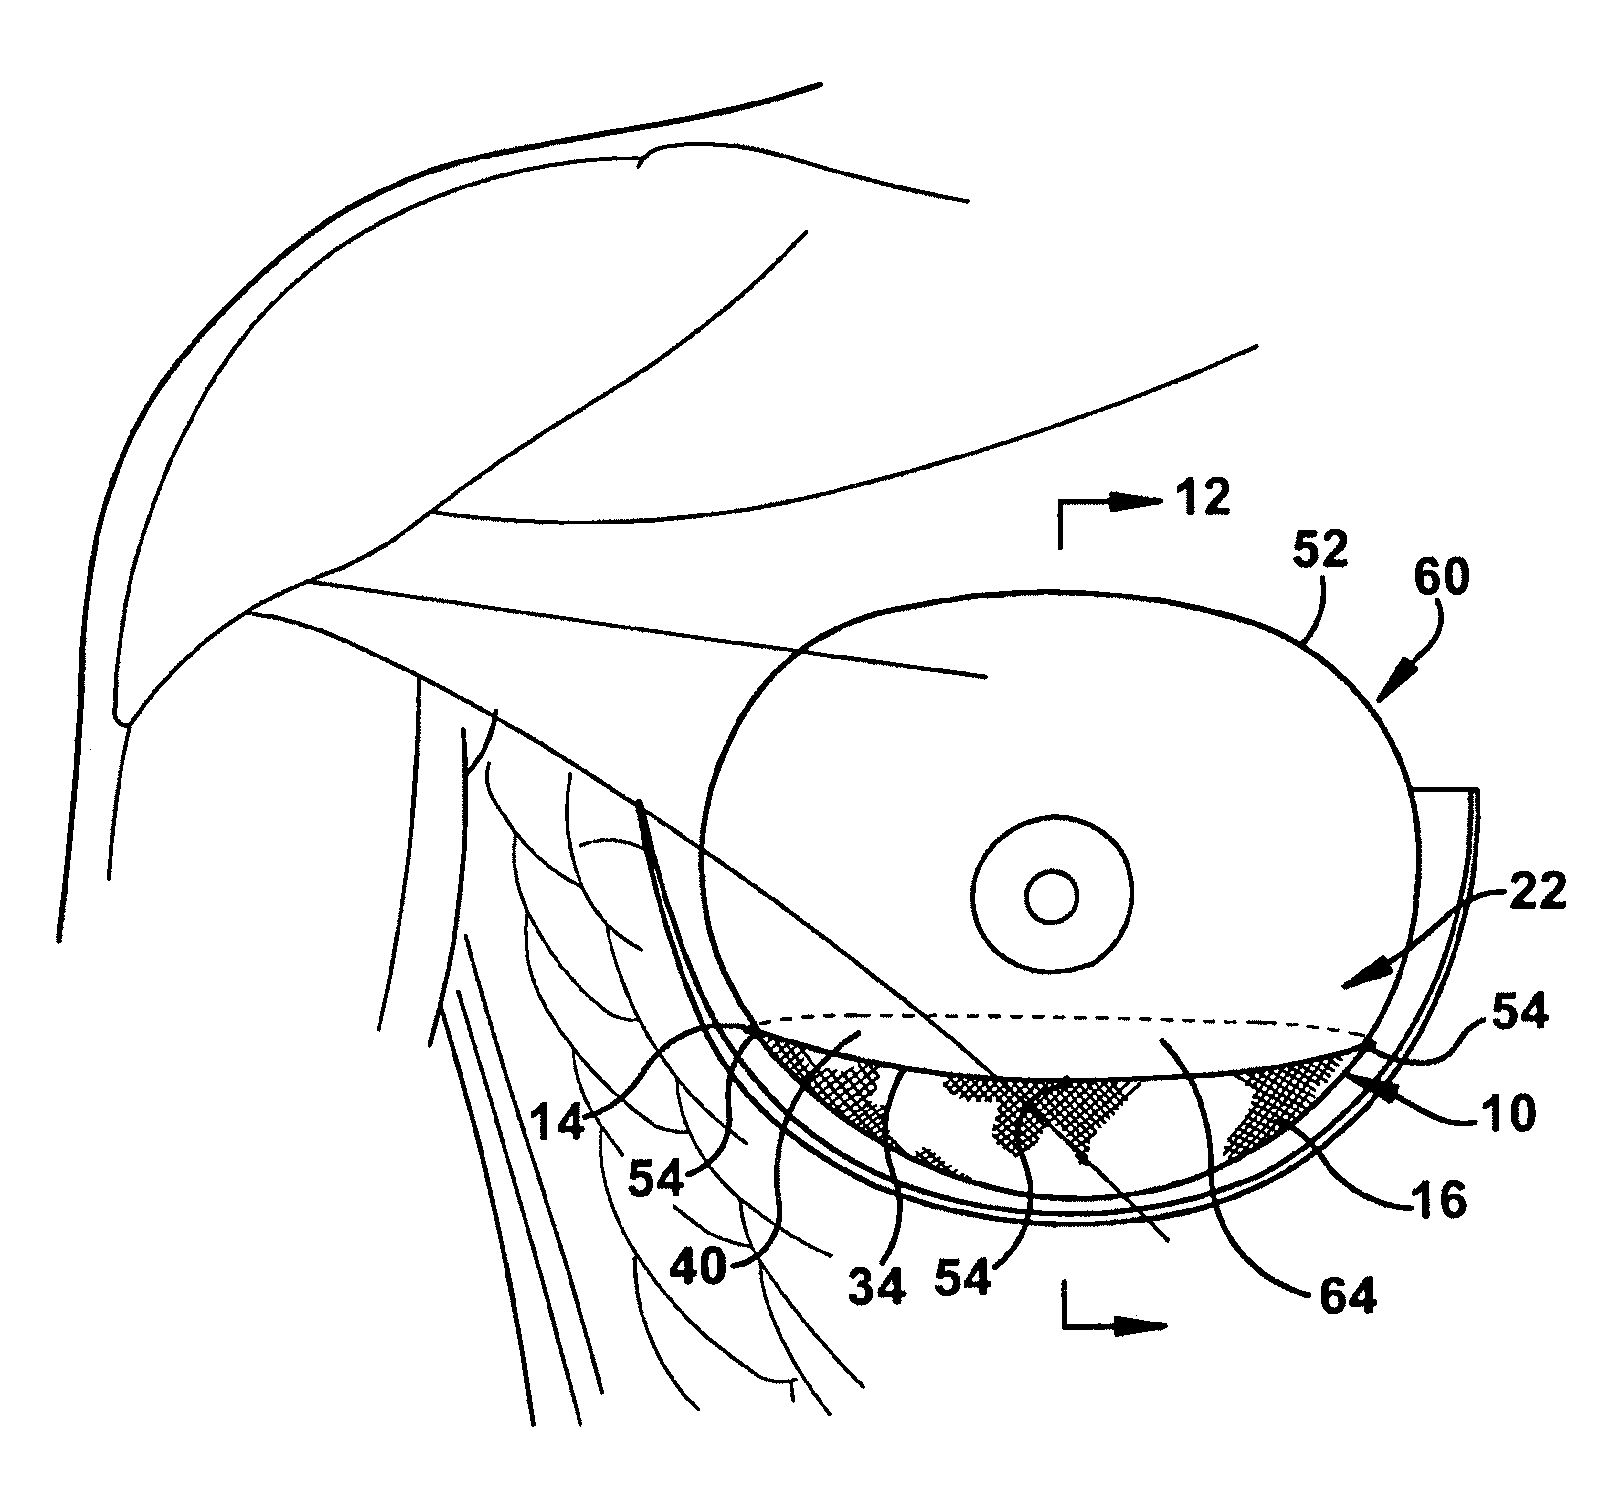 Implantable prosthesis for positioning and supporting a breast implant